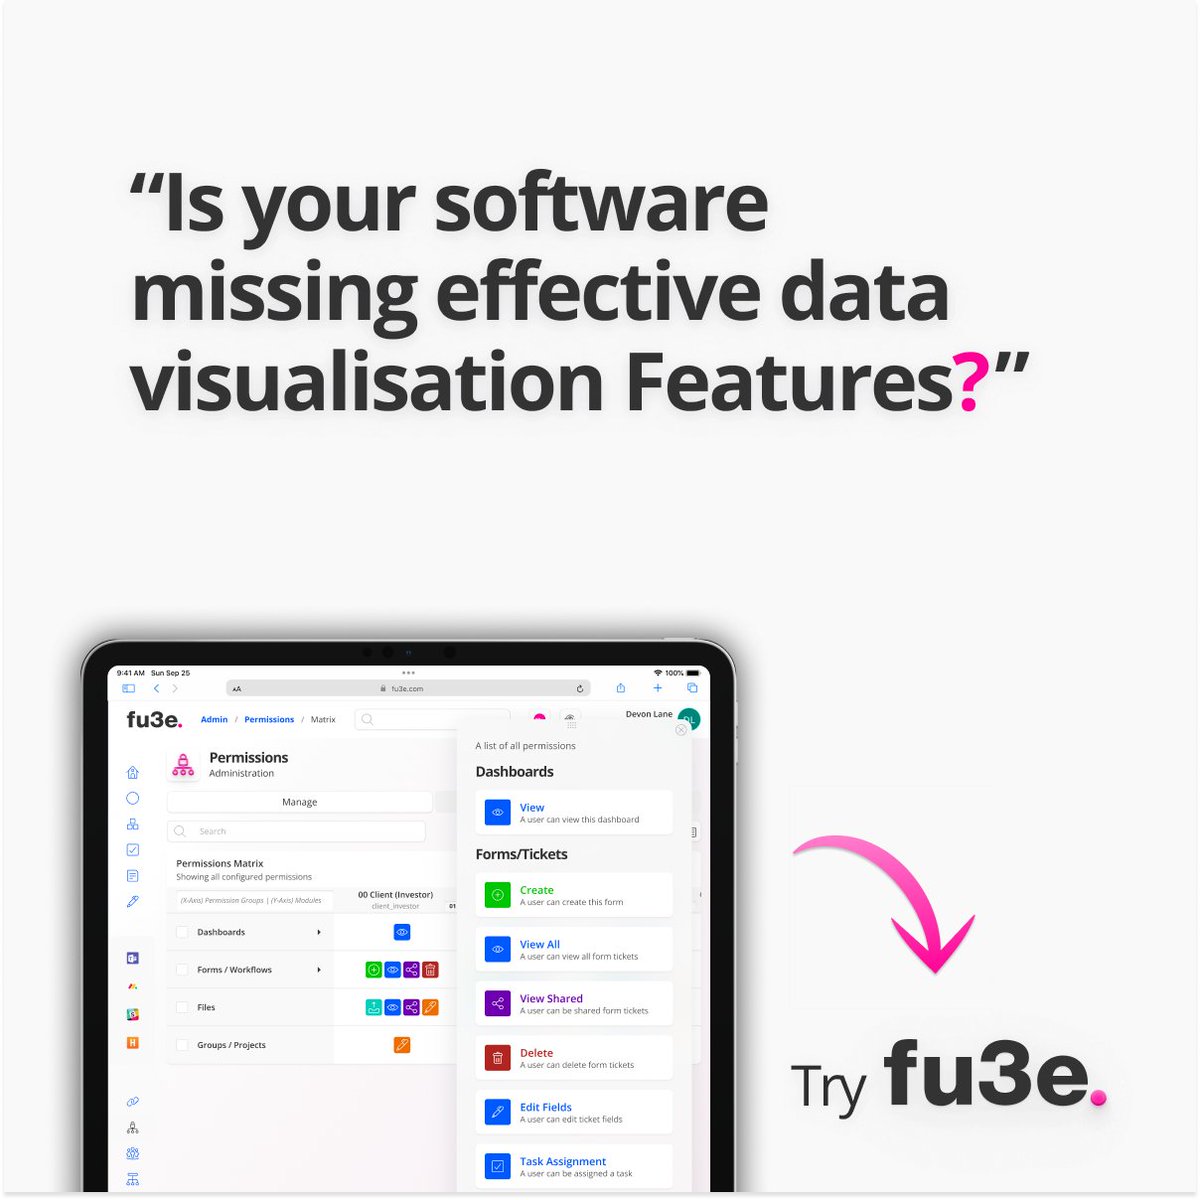 Is your software missing effective data visualisation Features?

Curious to learn more? eu1.hubs.ly/H06DDhk0

#Poweredbyfu3e #RealEstateTech #ProjectManagement #WorkflowAutomation #DigitalTransformation
#InnovationInRealEstate #ProptechSolutions #RealEstateSoftware